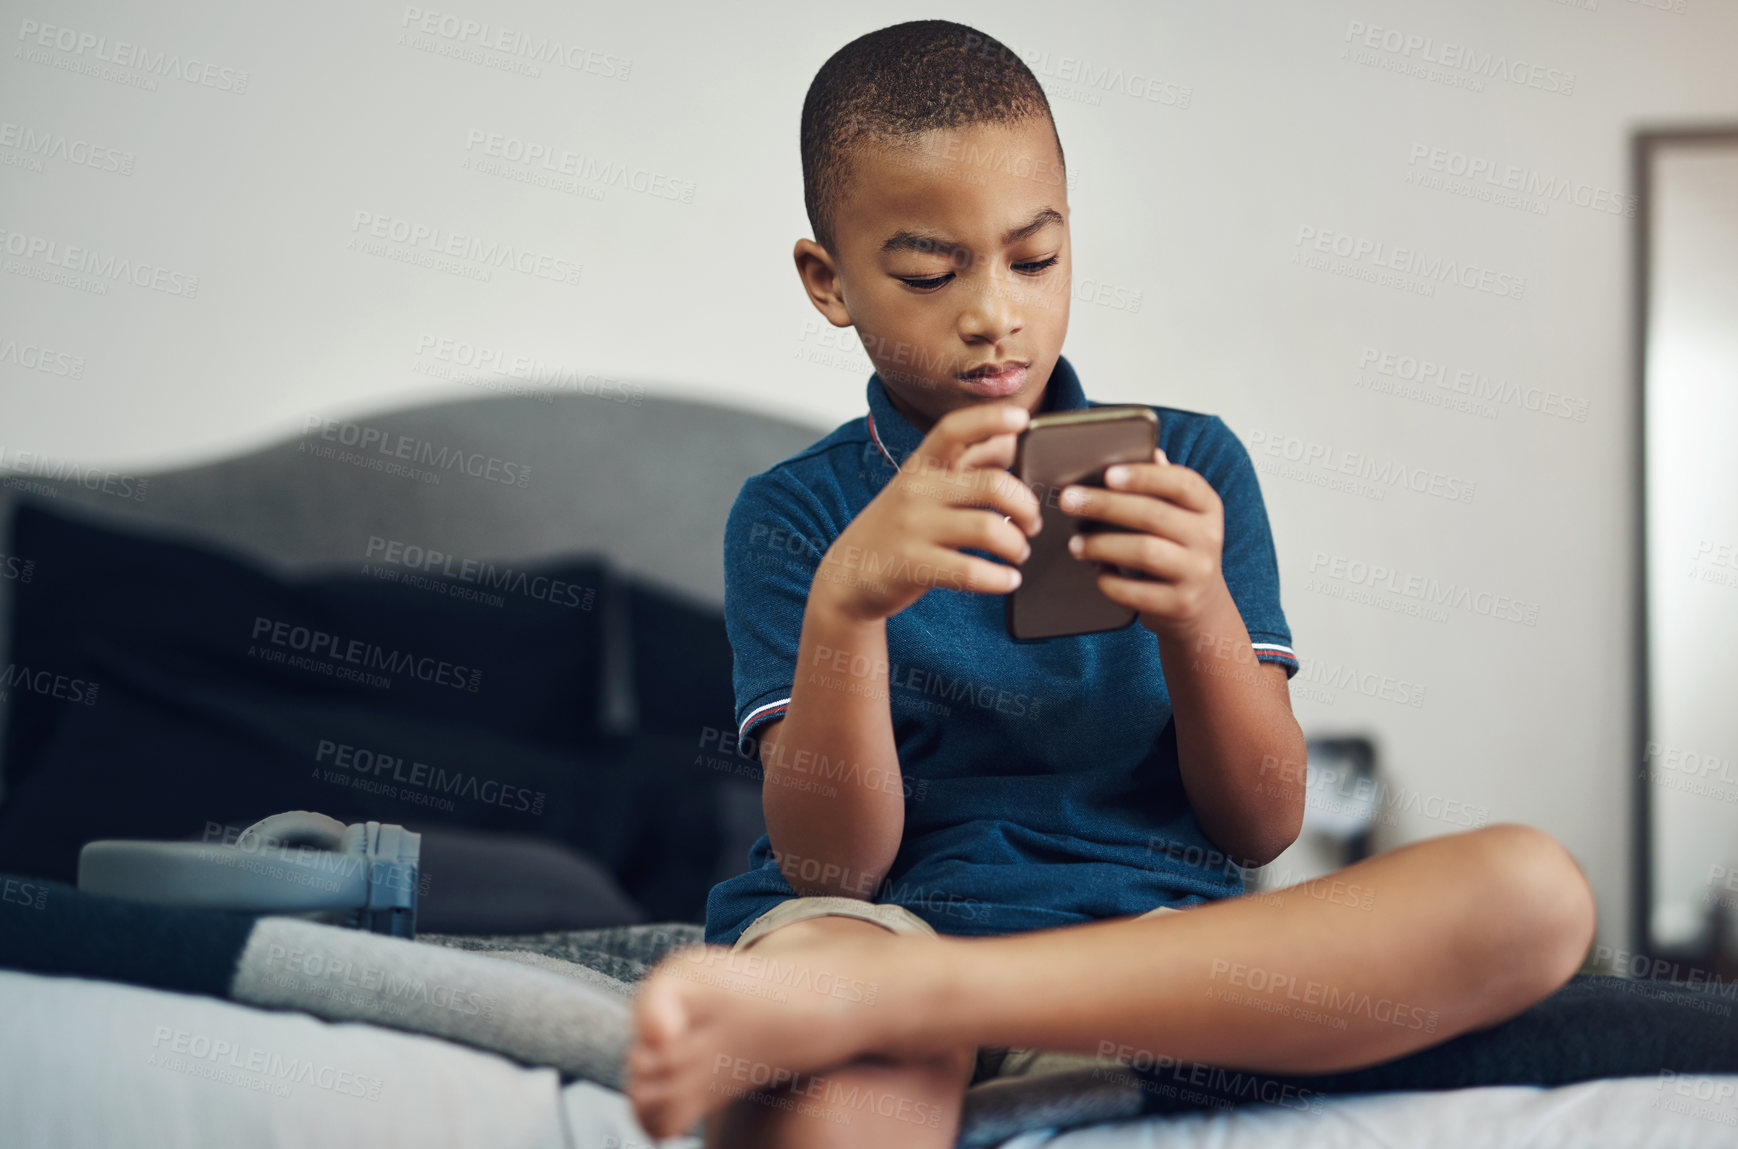 Buy stock photo Shot of a young boy using a cellphone while sitting on his bed